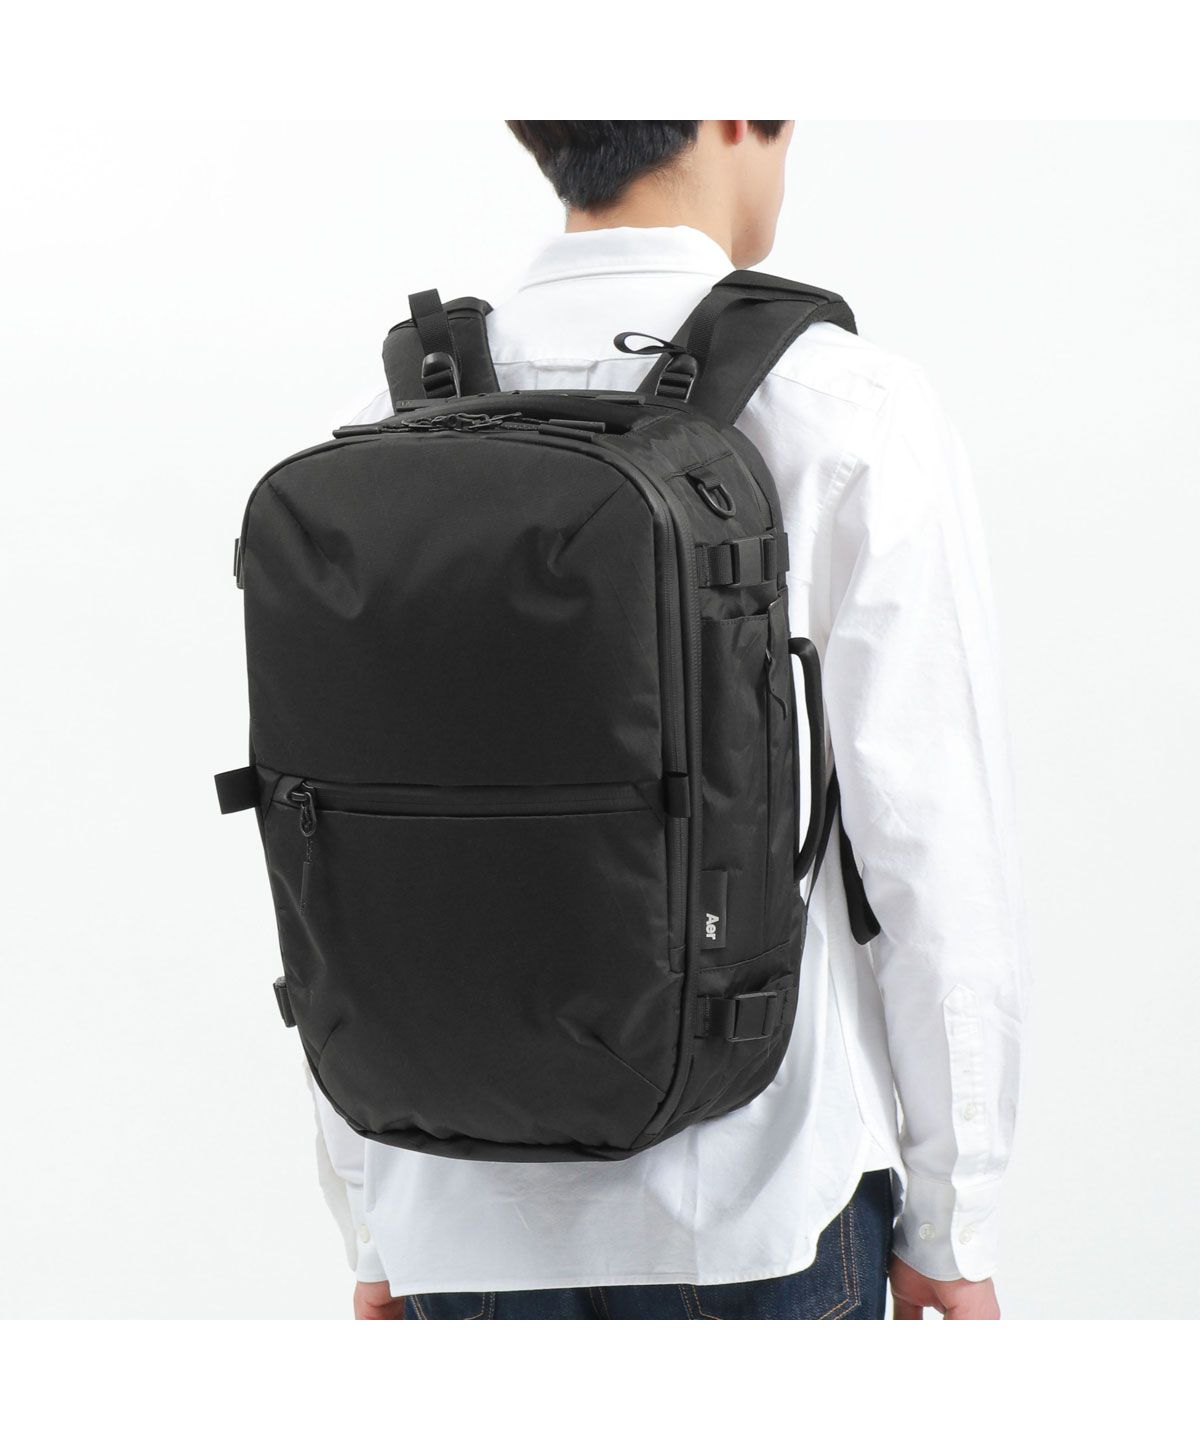 【Aer】Travel Pack 3 Small X-Pacエアー